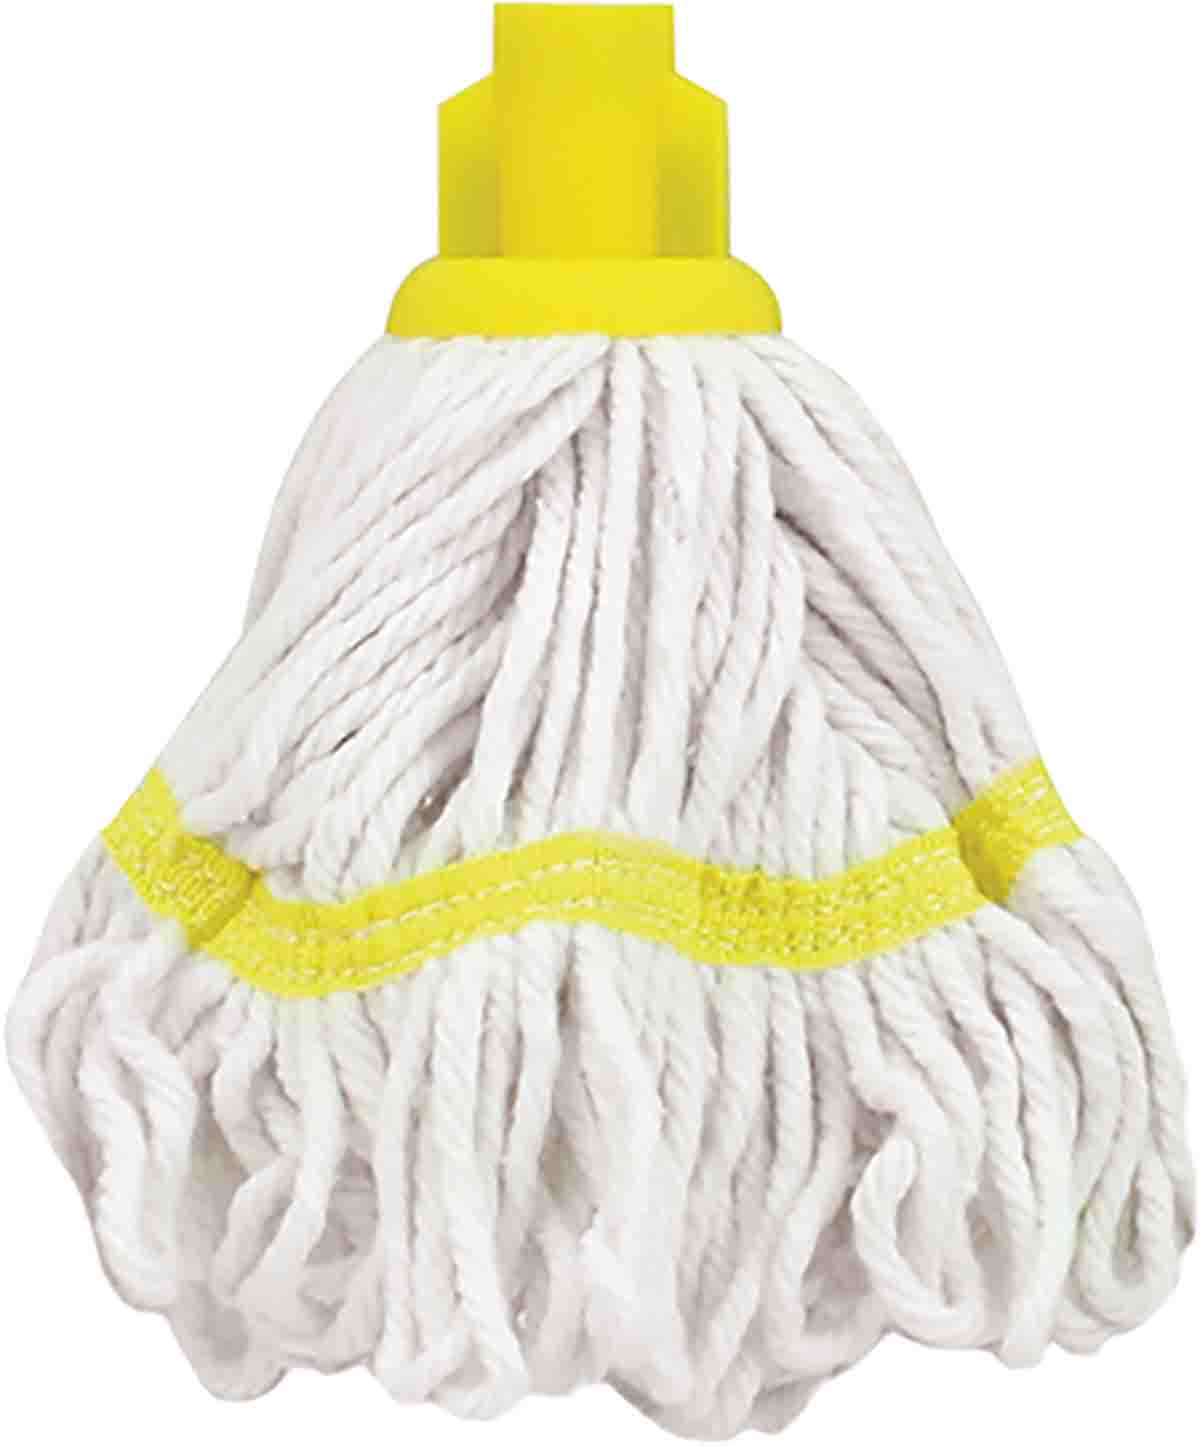 RS PRO Yellow Yarn Mop Head for use with RS PRO Aluminium Handle